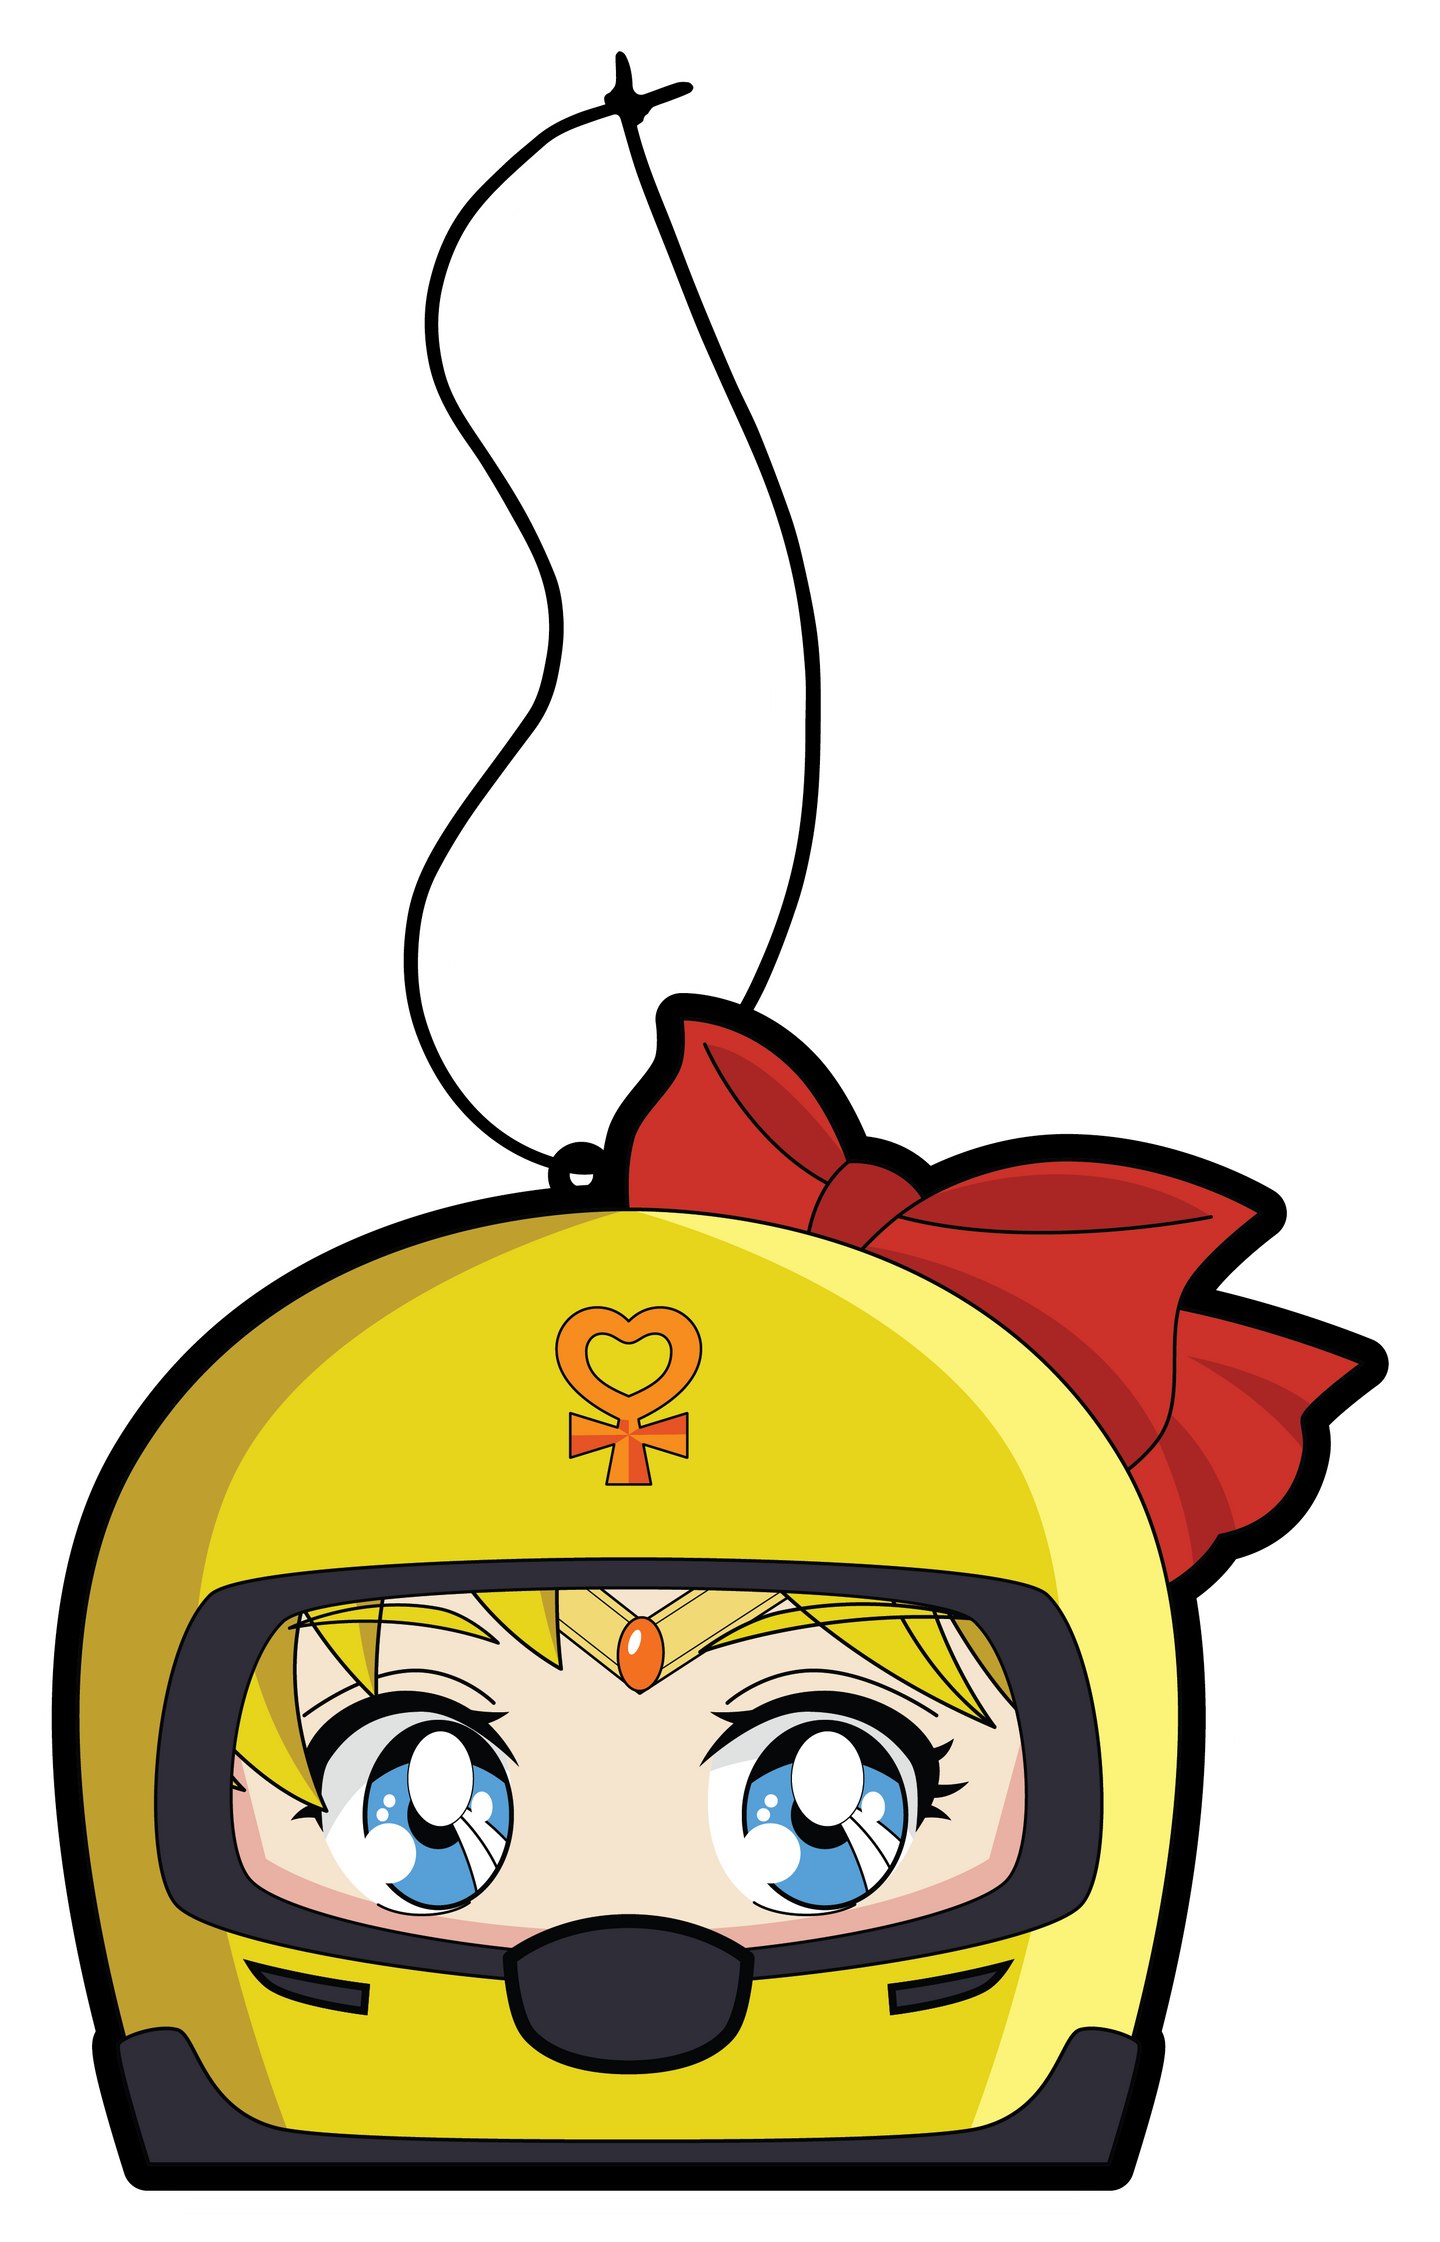 Venus air freshener hanging from black string. Japanese anime character blonde hair blue eyes wearing yellow helmet with pendent logo and red bow.